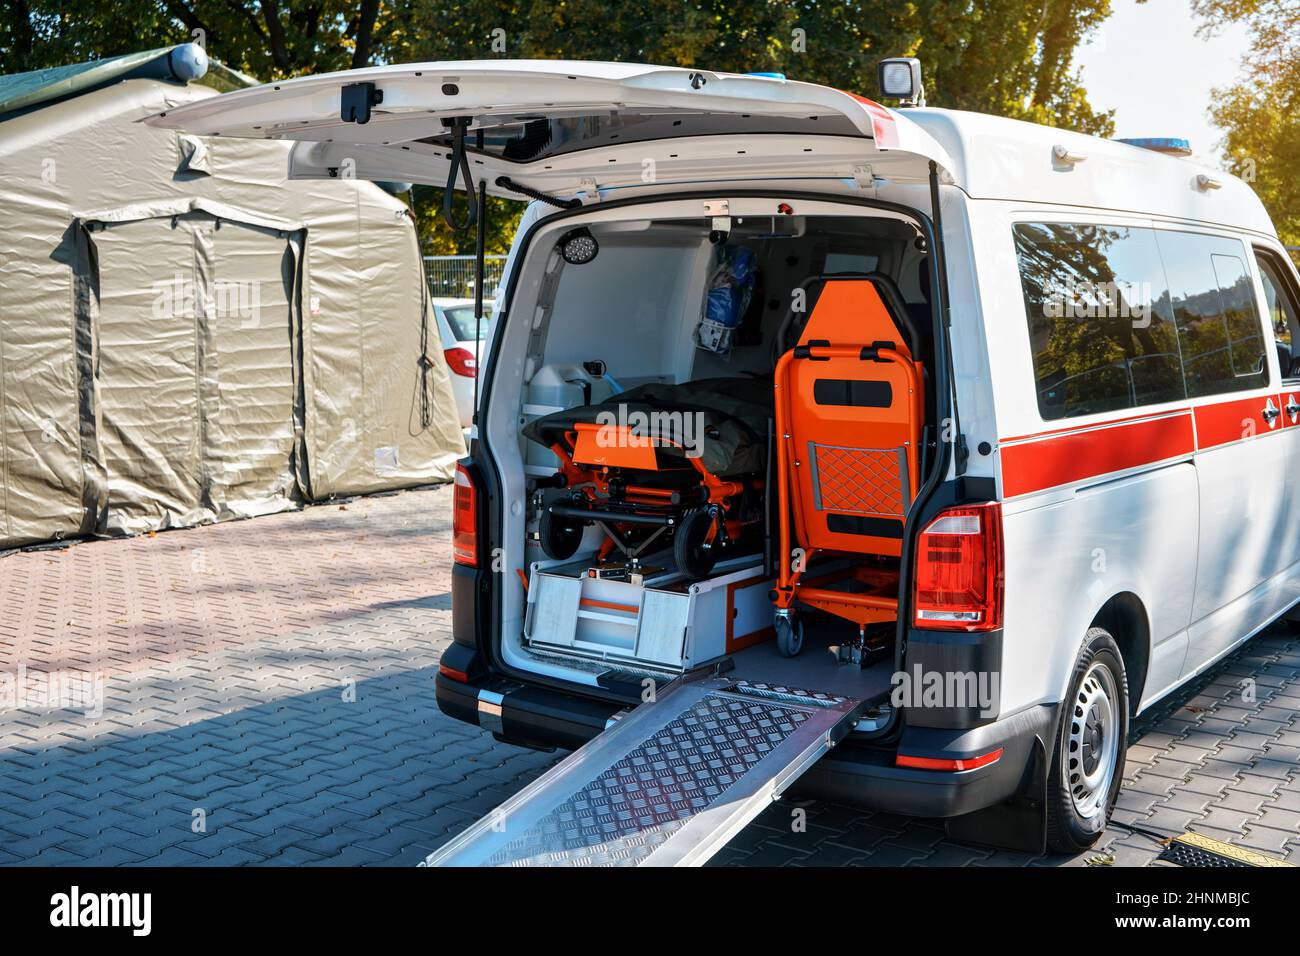 Opened back door of ambulance vehicle, bright orange carrying stretcher and chair visible Stock Photo